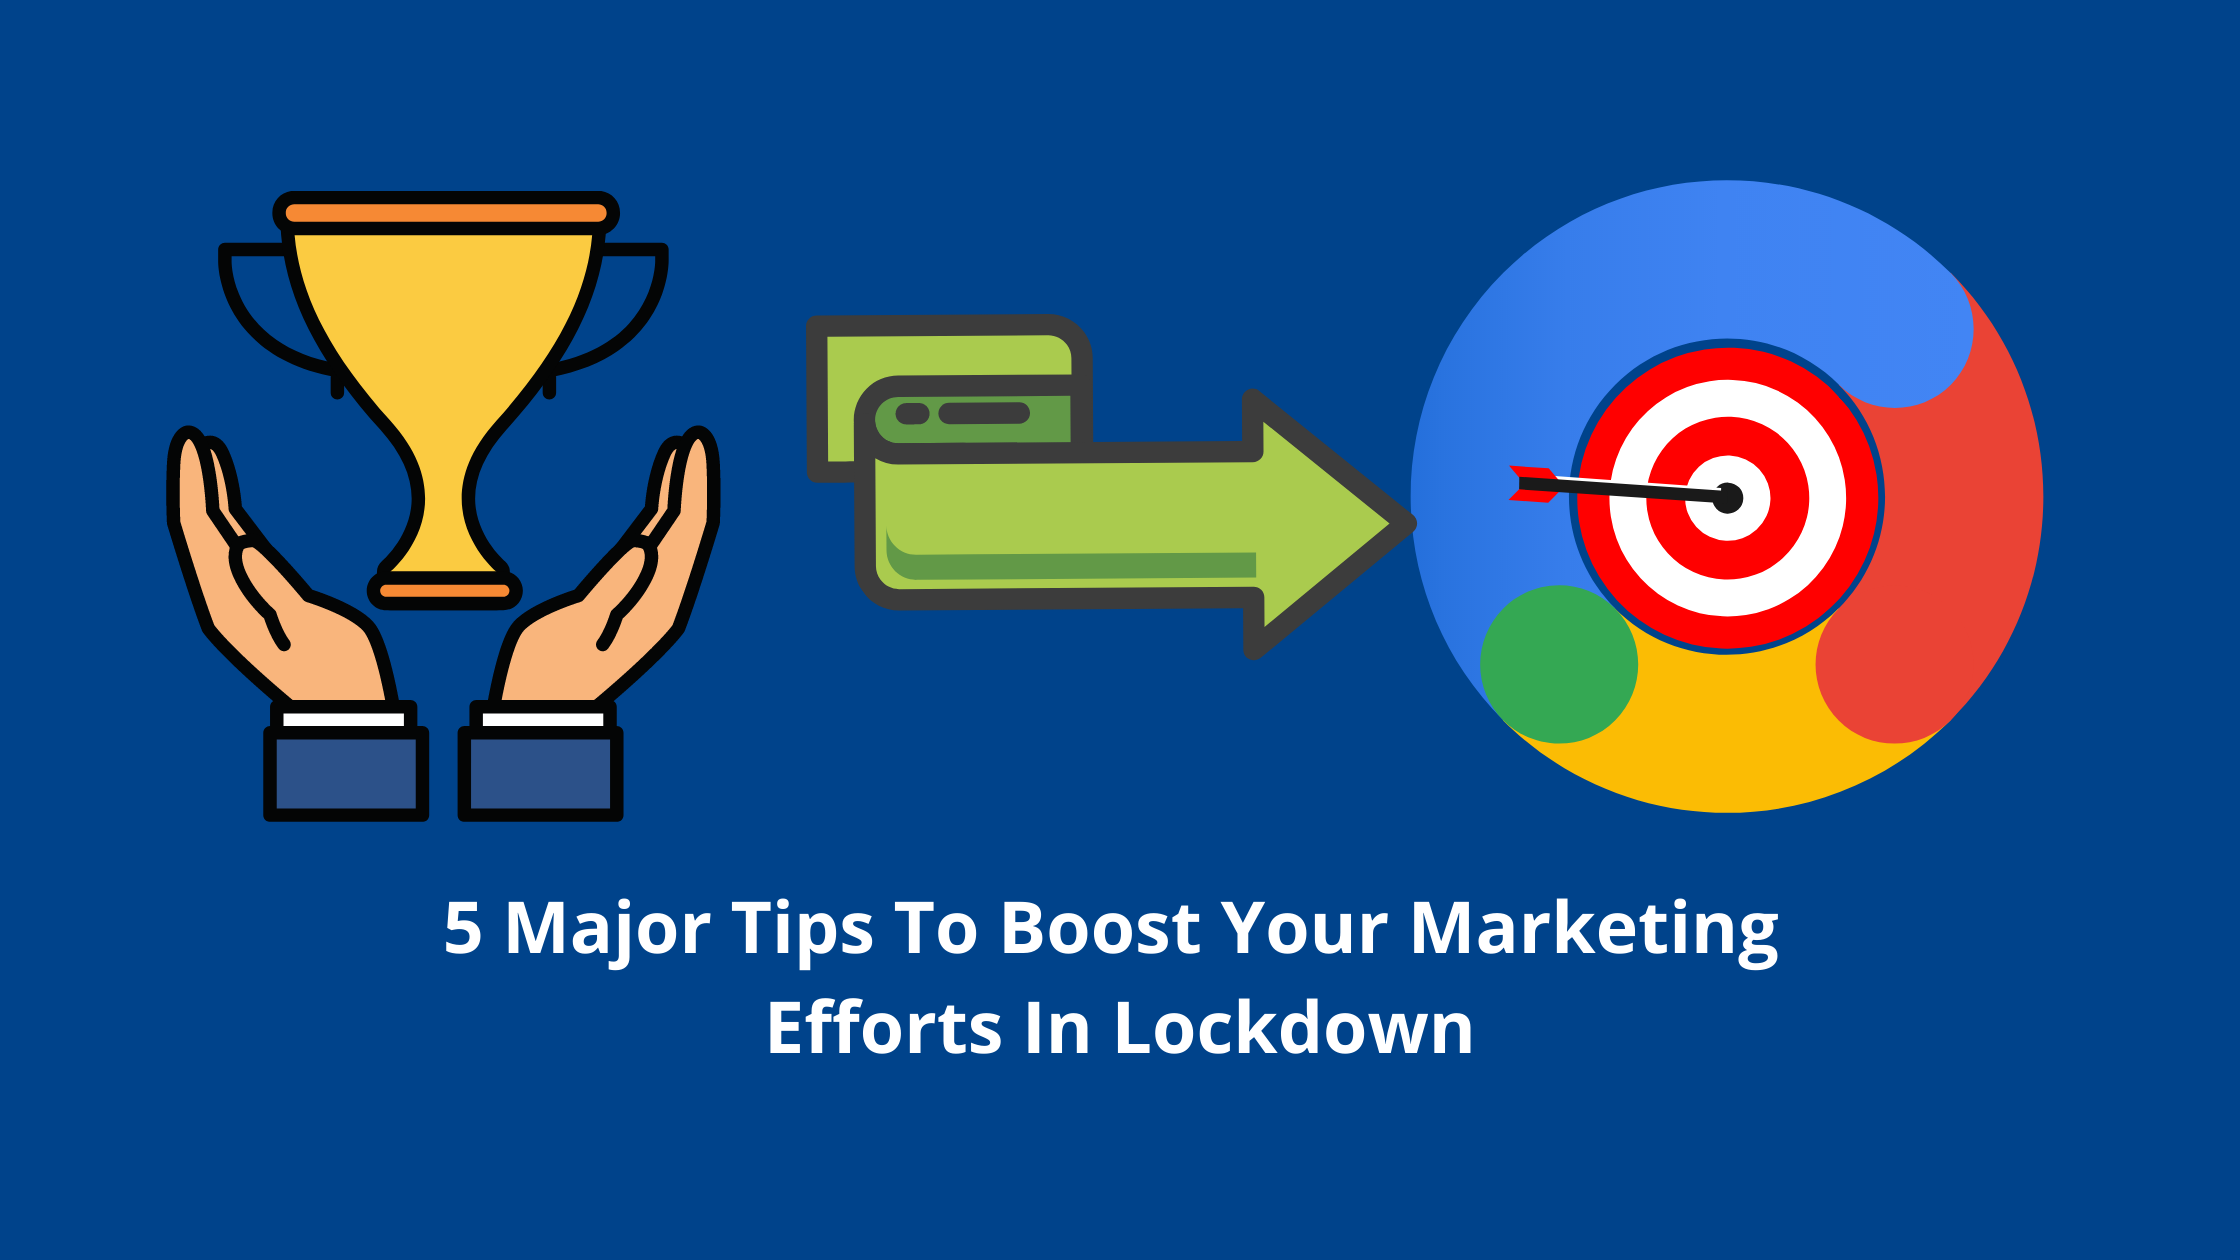 Tips To Boost Your Marketing Efforts In Lockdown